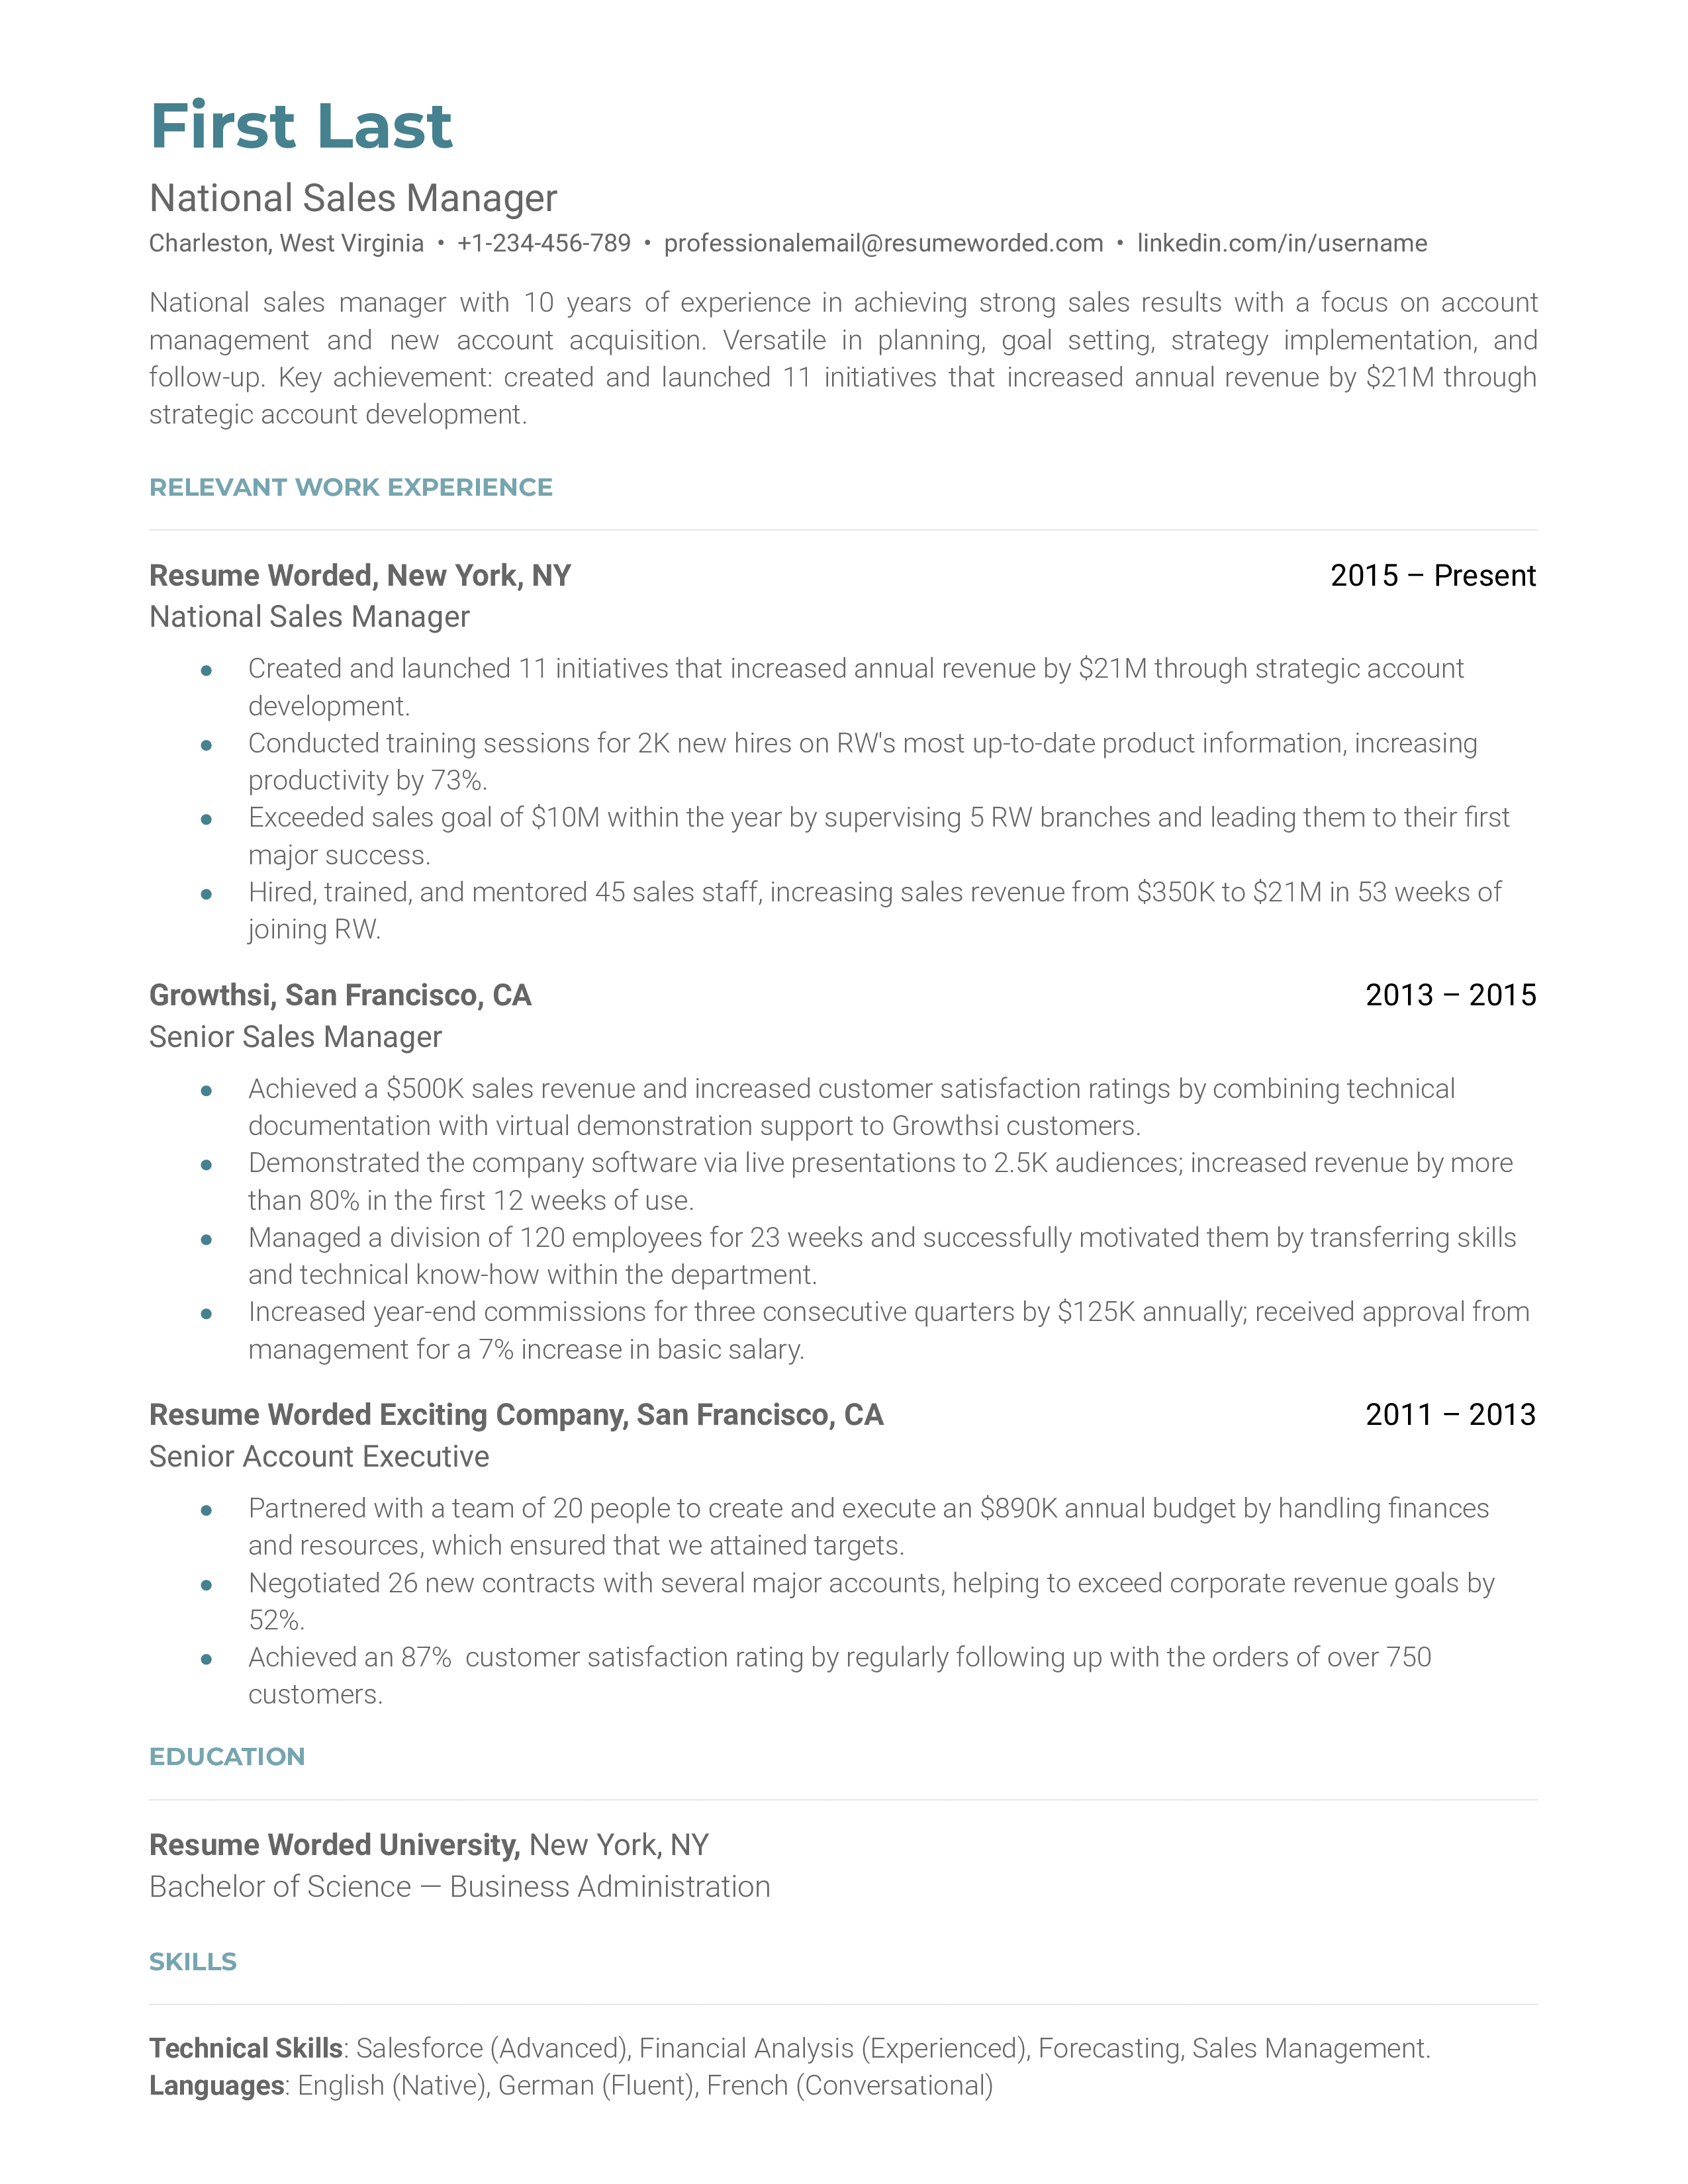 Screenshot of a CV for a National Sales Manager role.